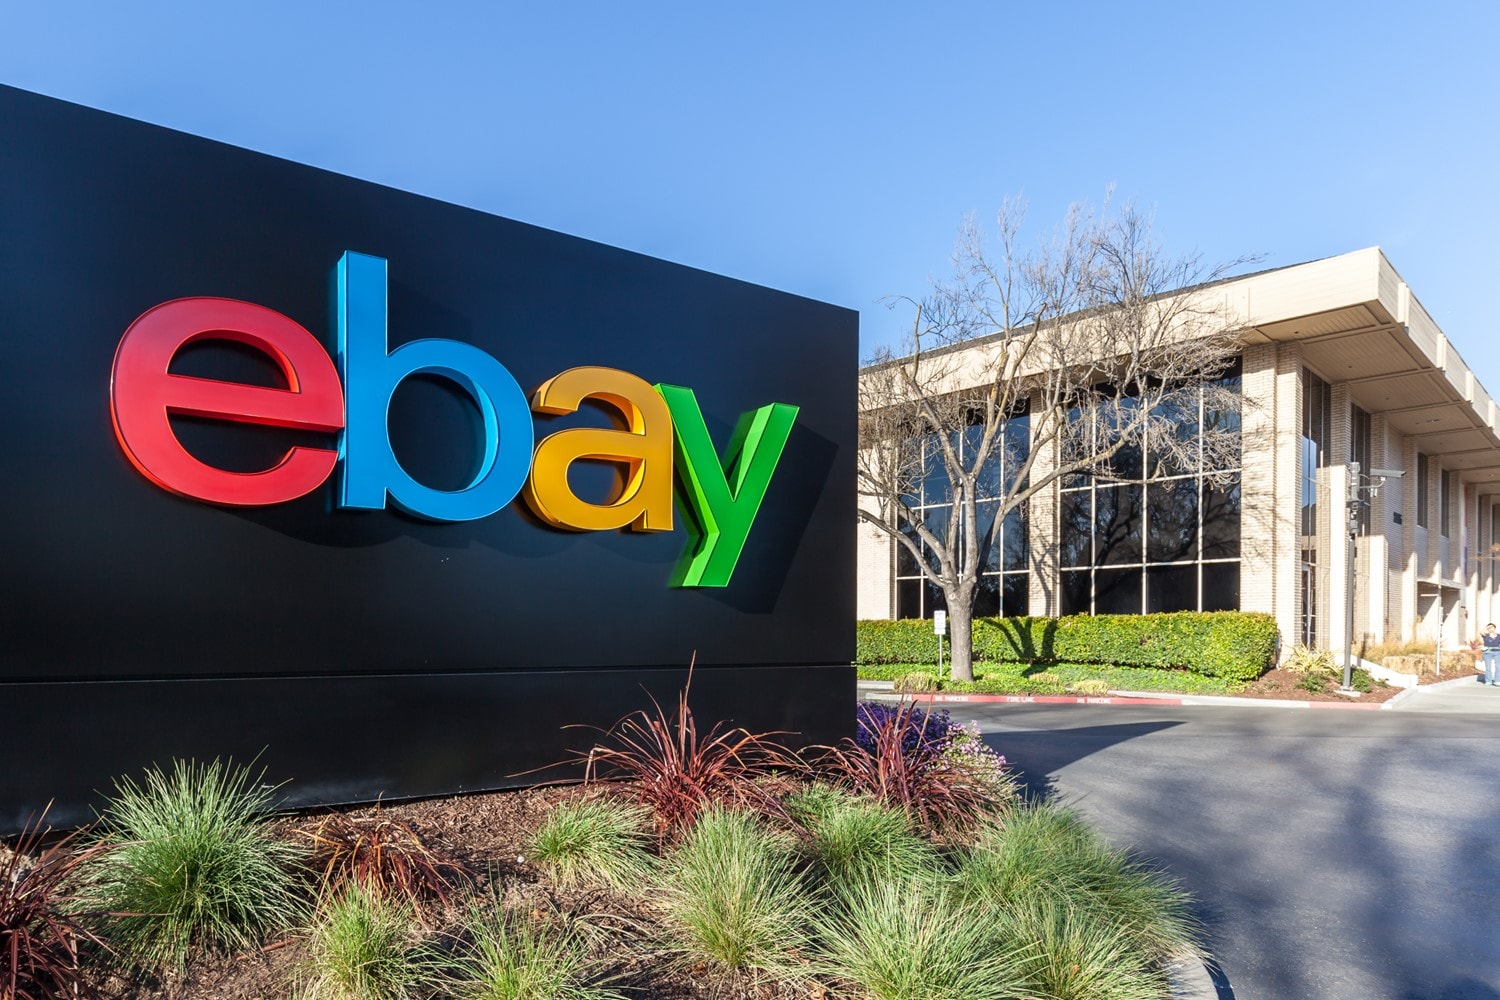 A black sign with the eBay logo sits in front of an office building.